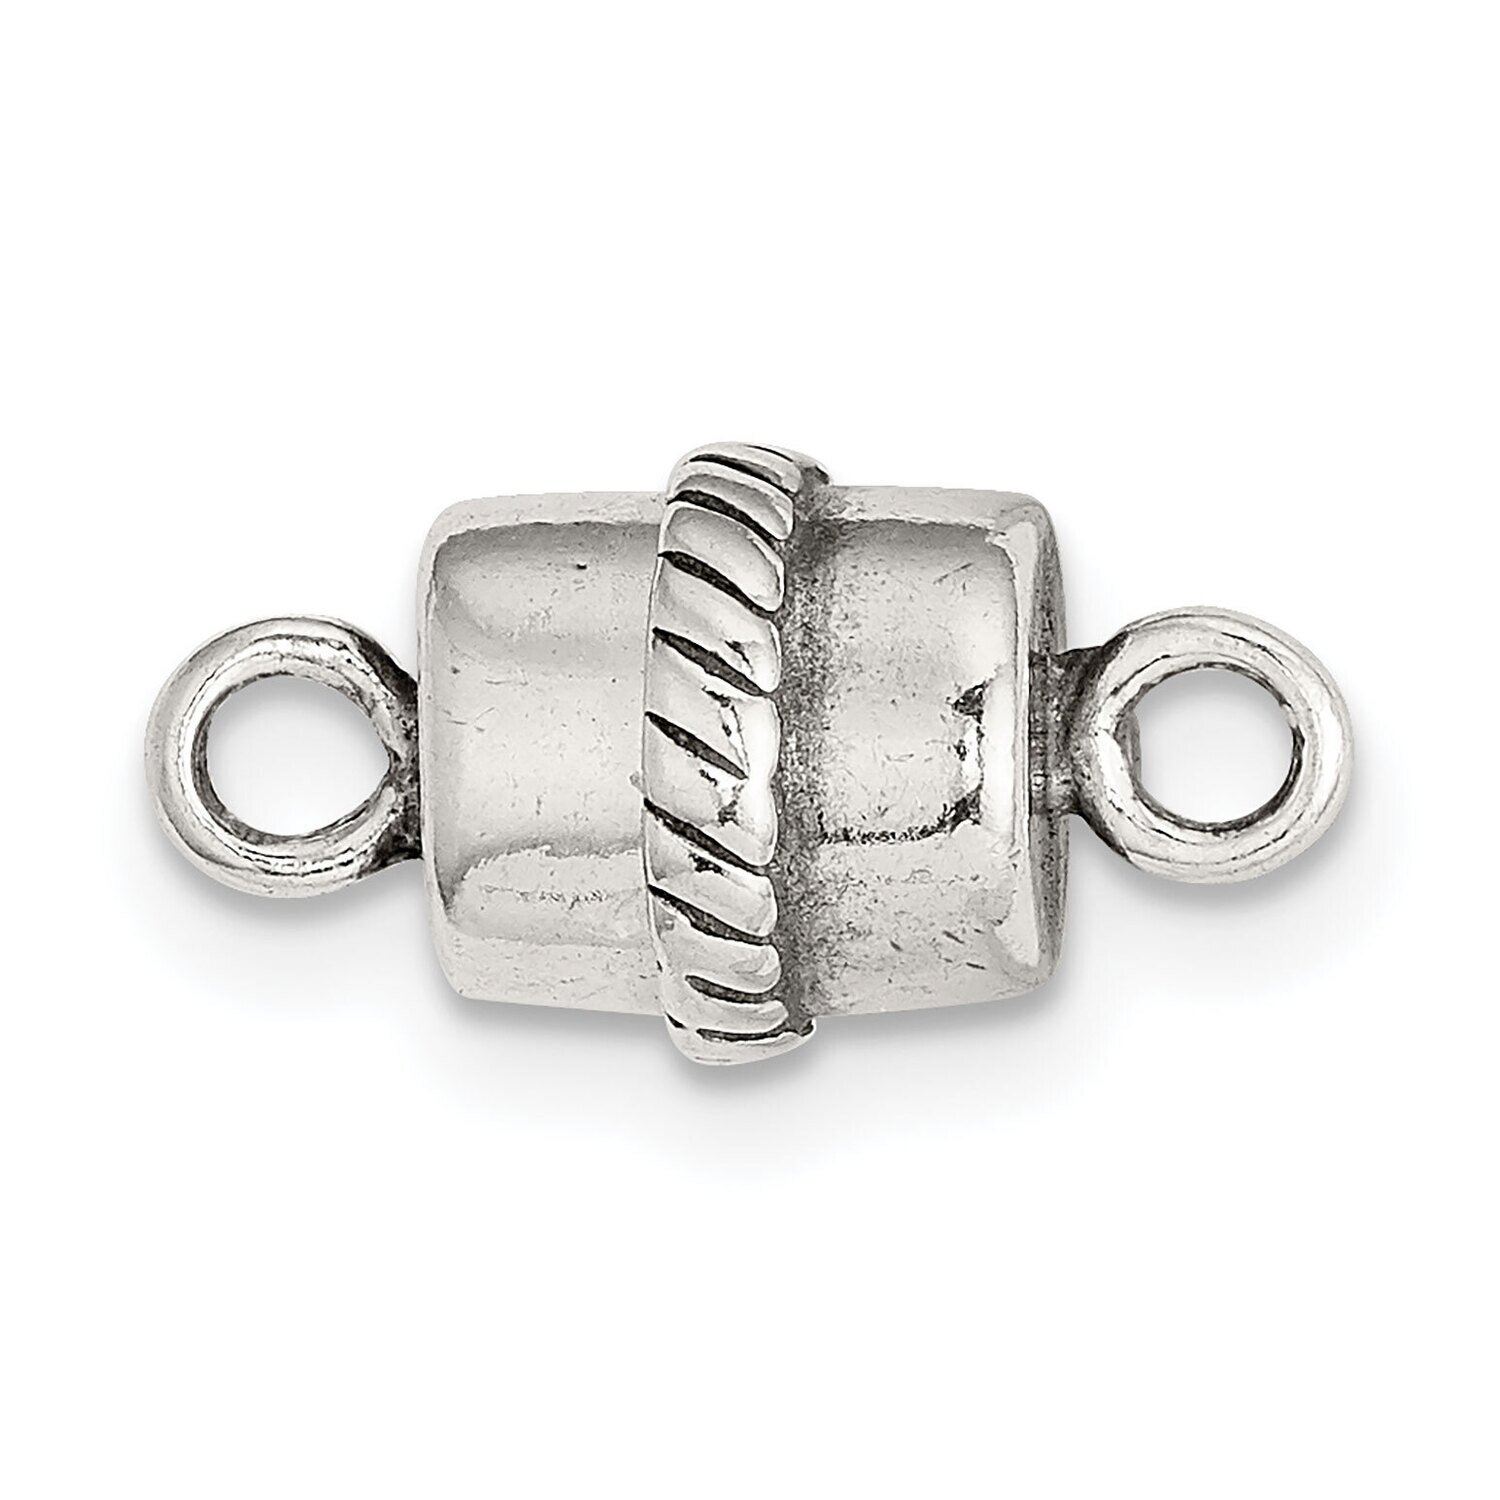 9.8 x 7.6mm Magnetic Clasp Sterling Silver SS4829